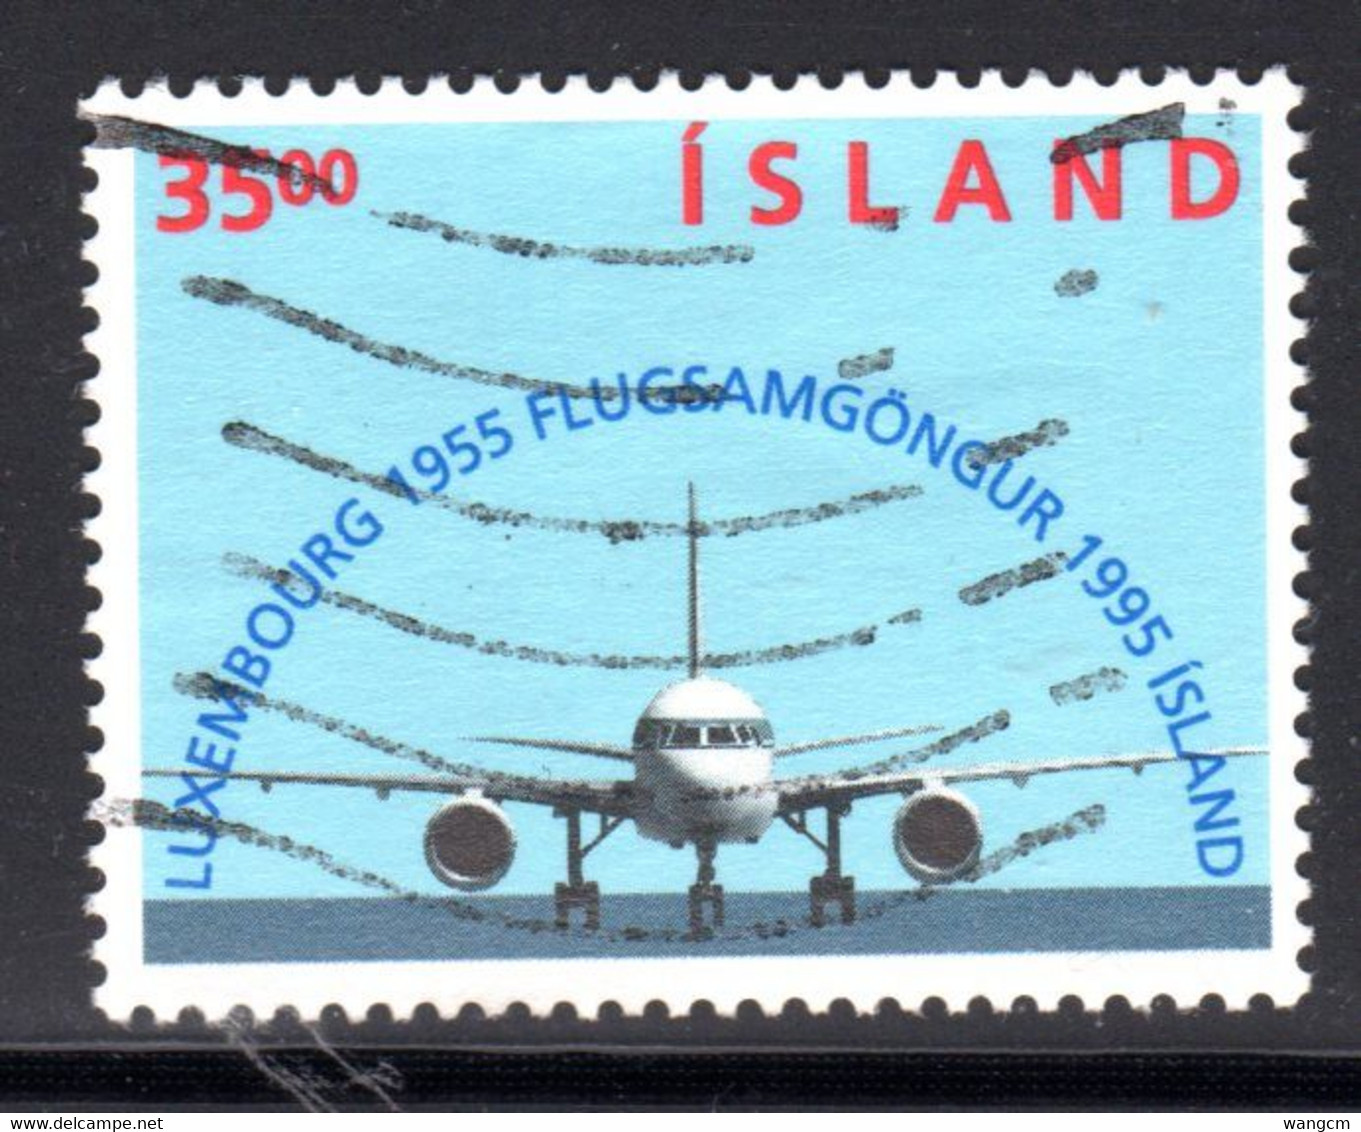 Iceland 1995 35k Iceland - Luxembourg Air Link Fine Used - Oblitérés